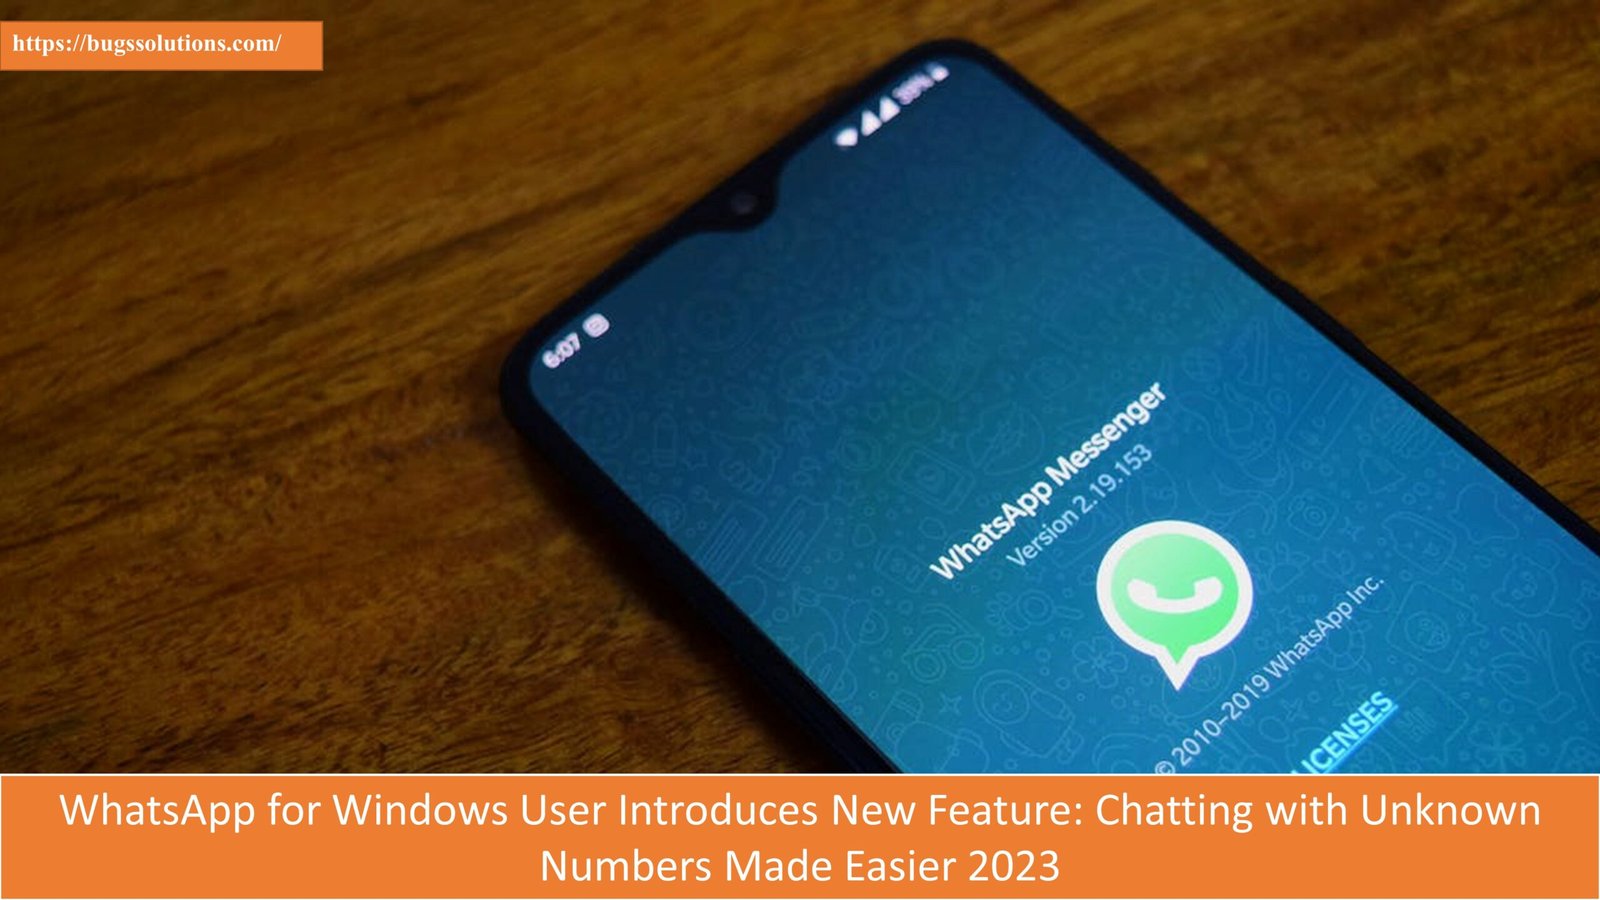 WhatsApp for Windows User Introduces New Feature: Chatting with Unknown Numbers Made Easier 2023